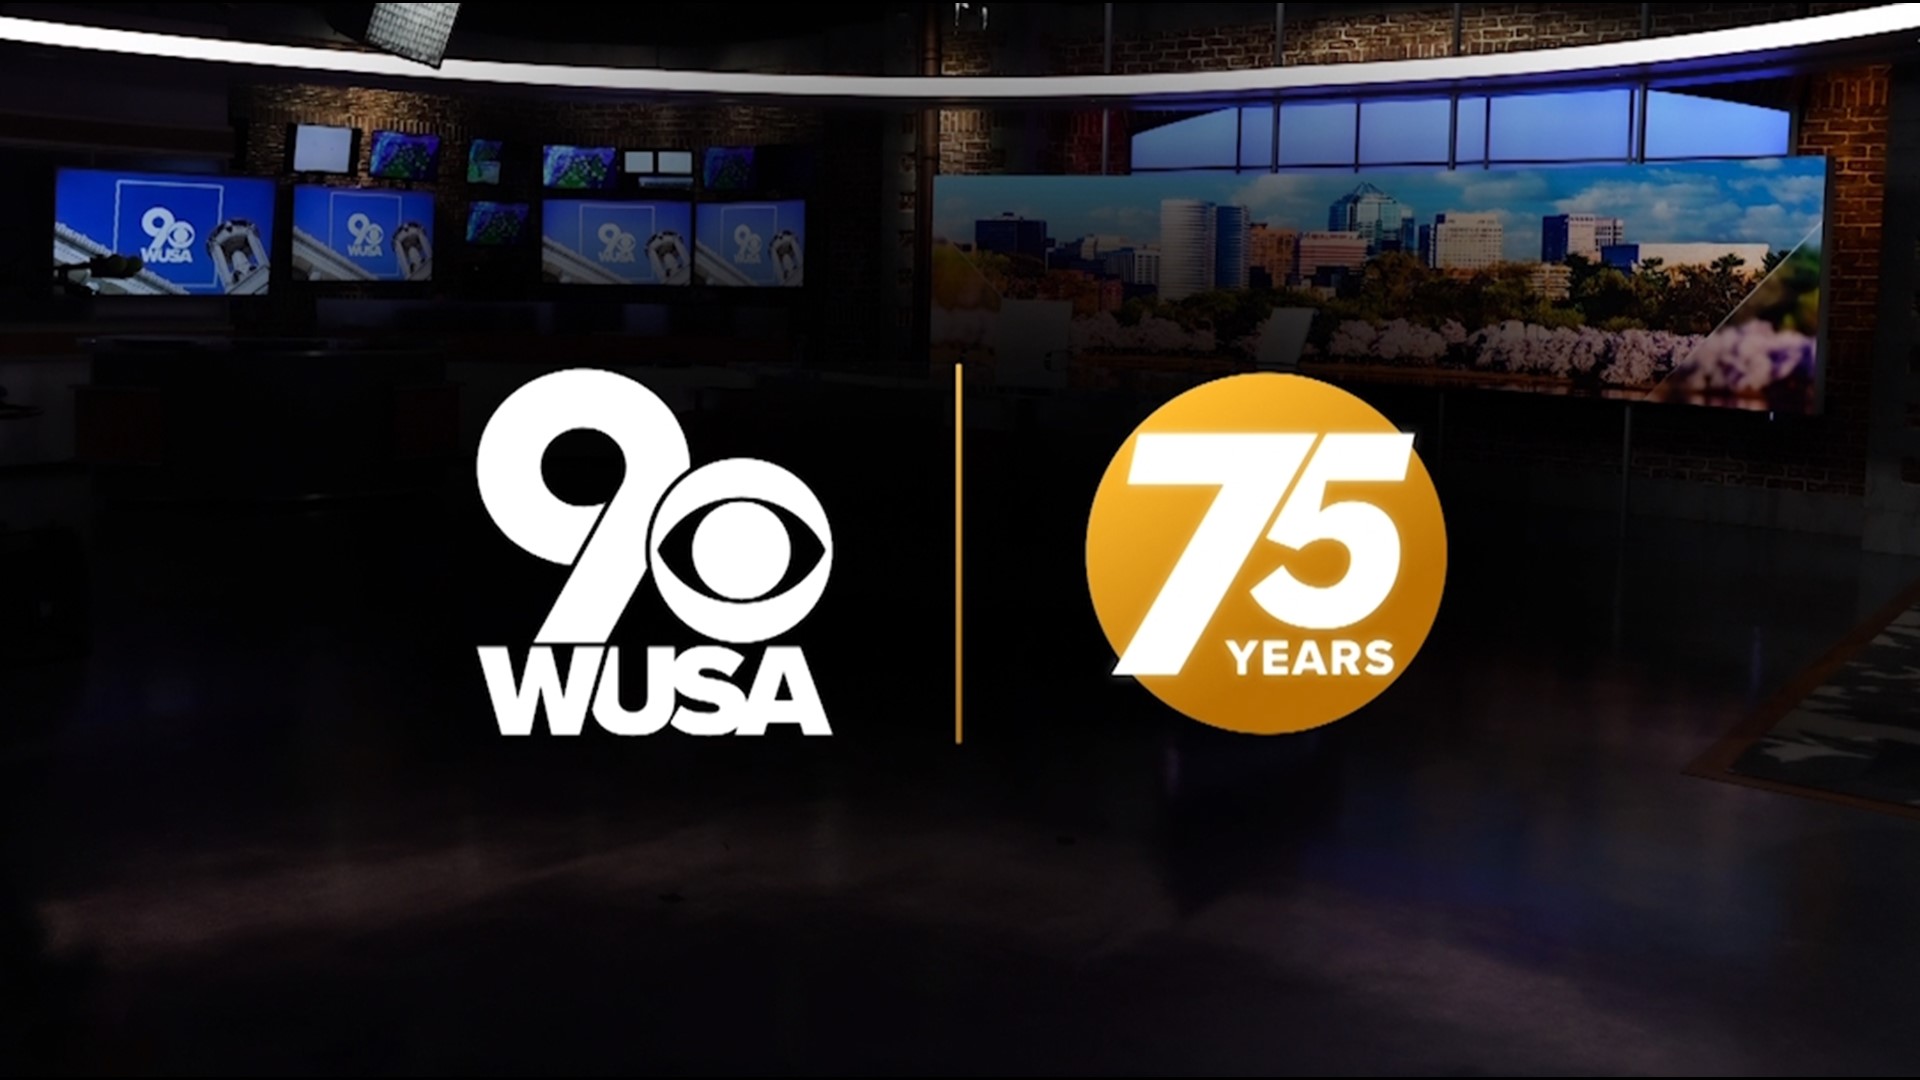 This year marks a special celebration for us here at WUSA-9. It's our 75th anniversary.